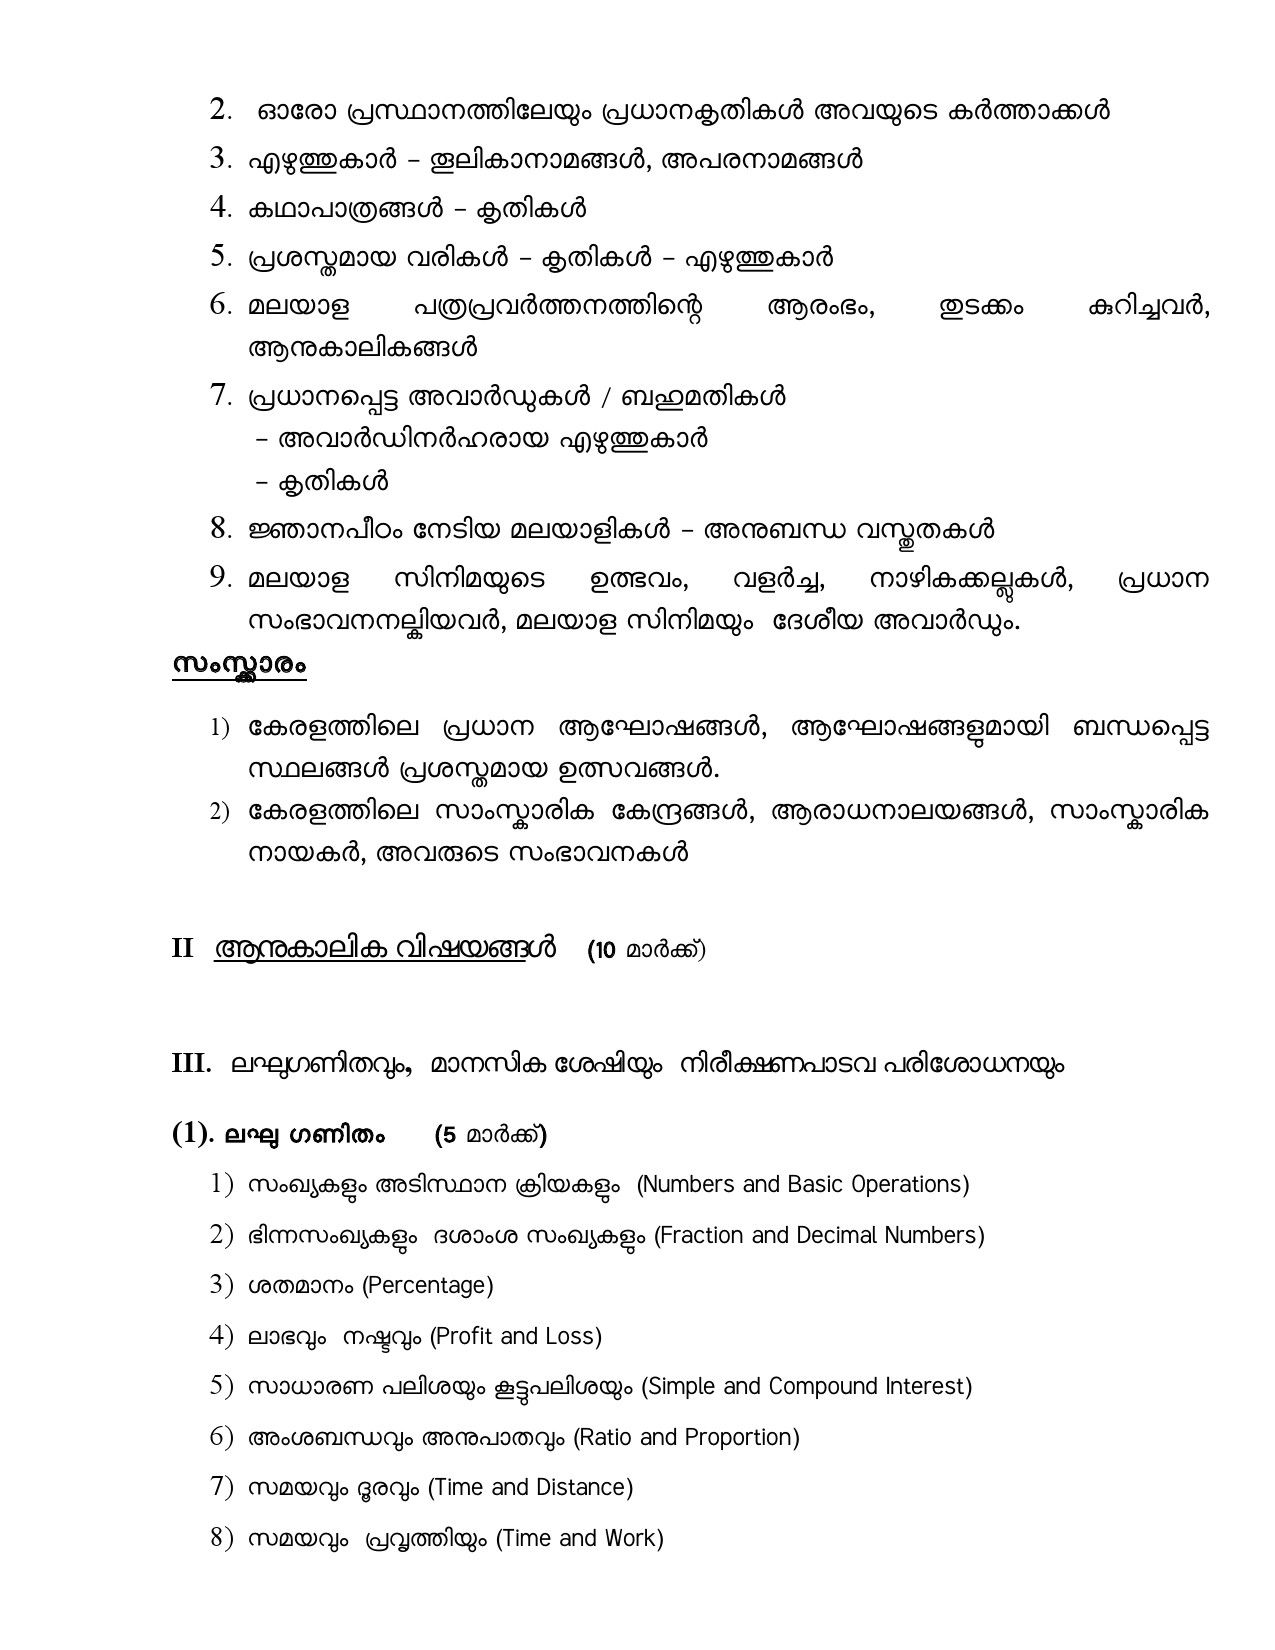 Civil Police Officer Final Examination Syllabus For Plus Two Level - Notification Image 7